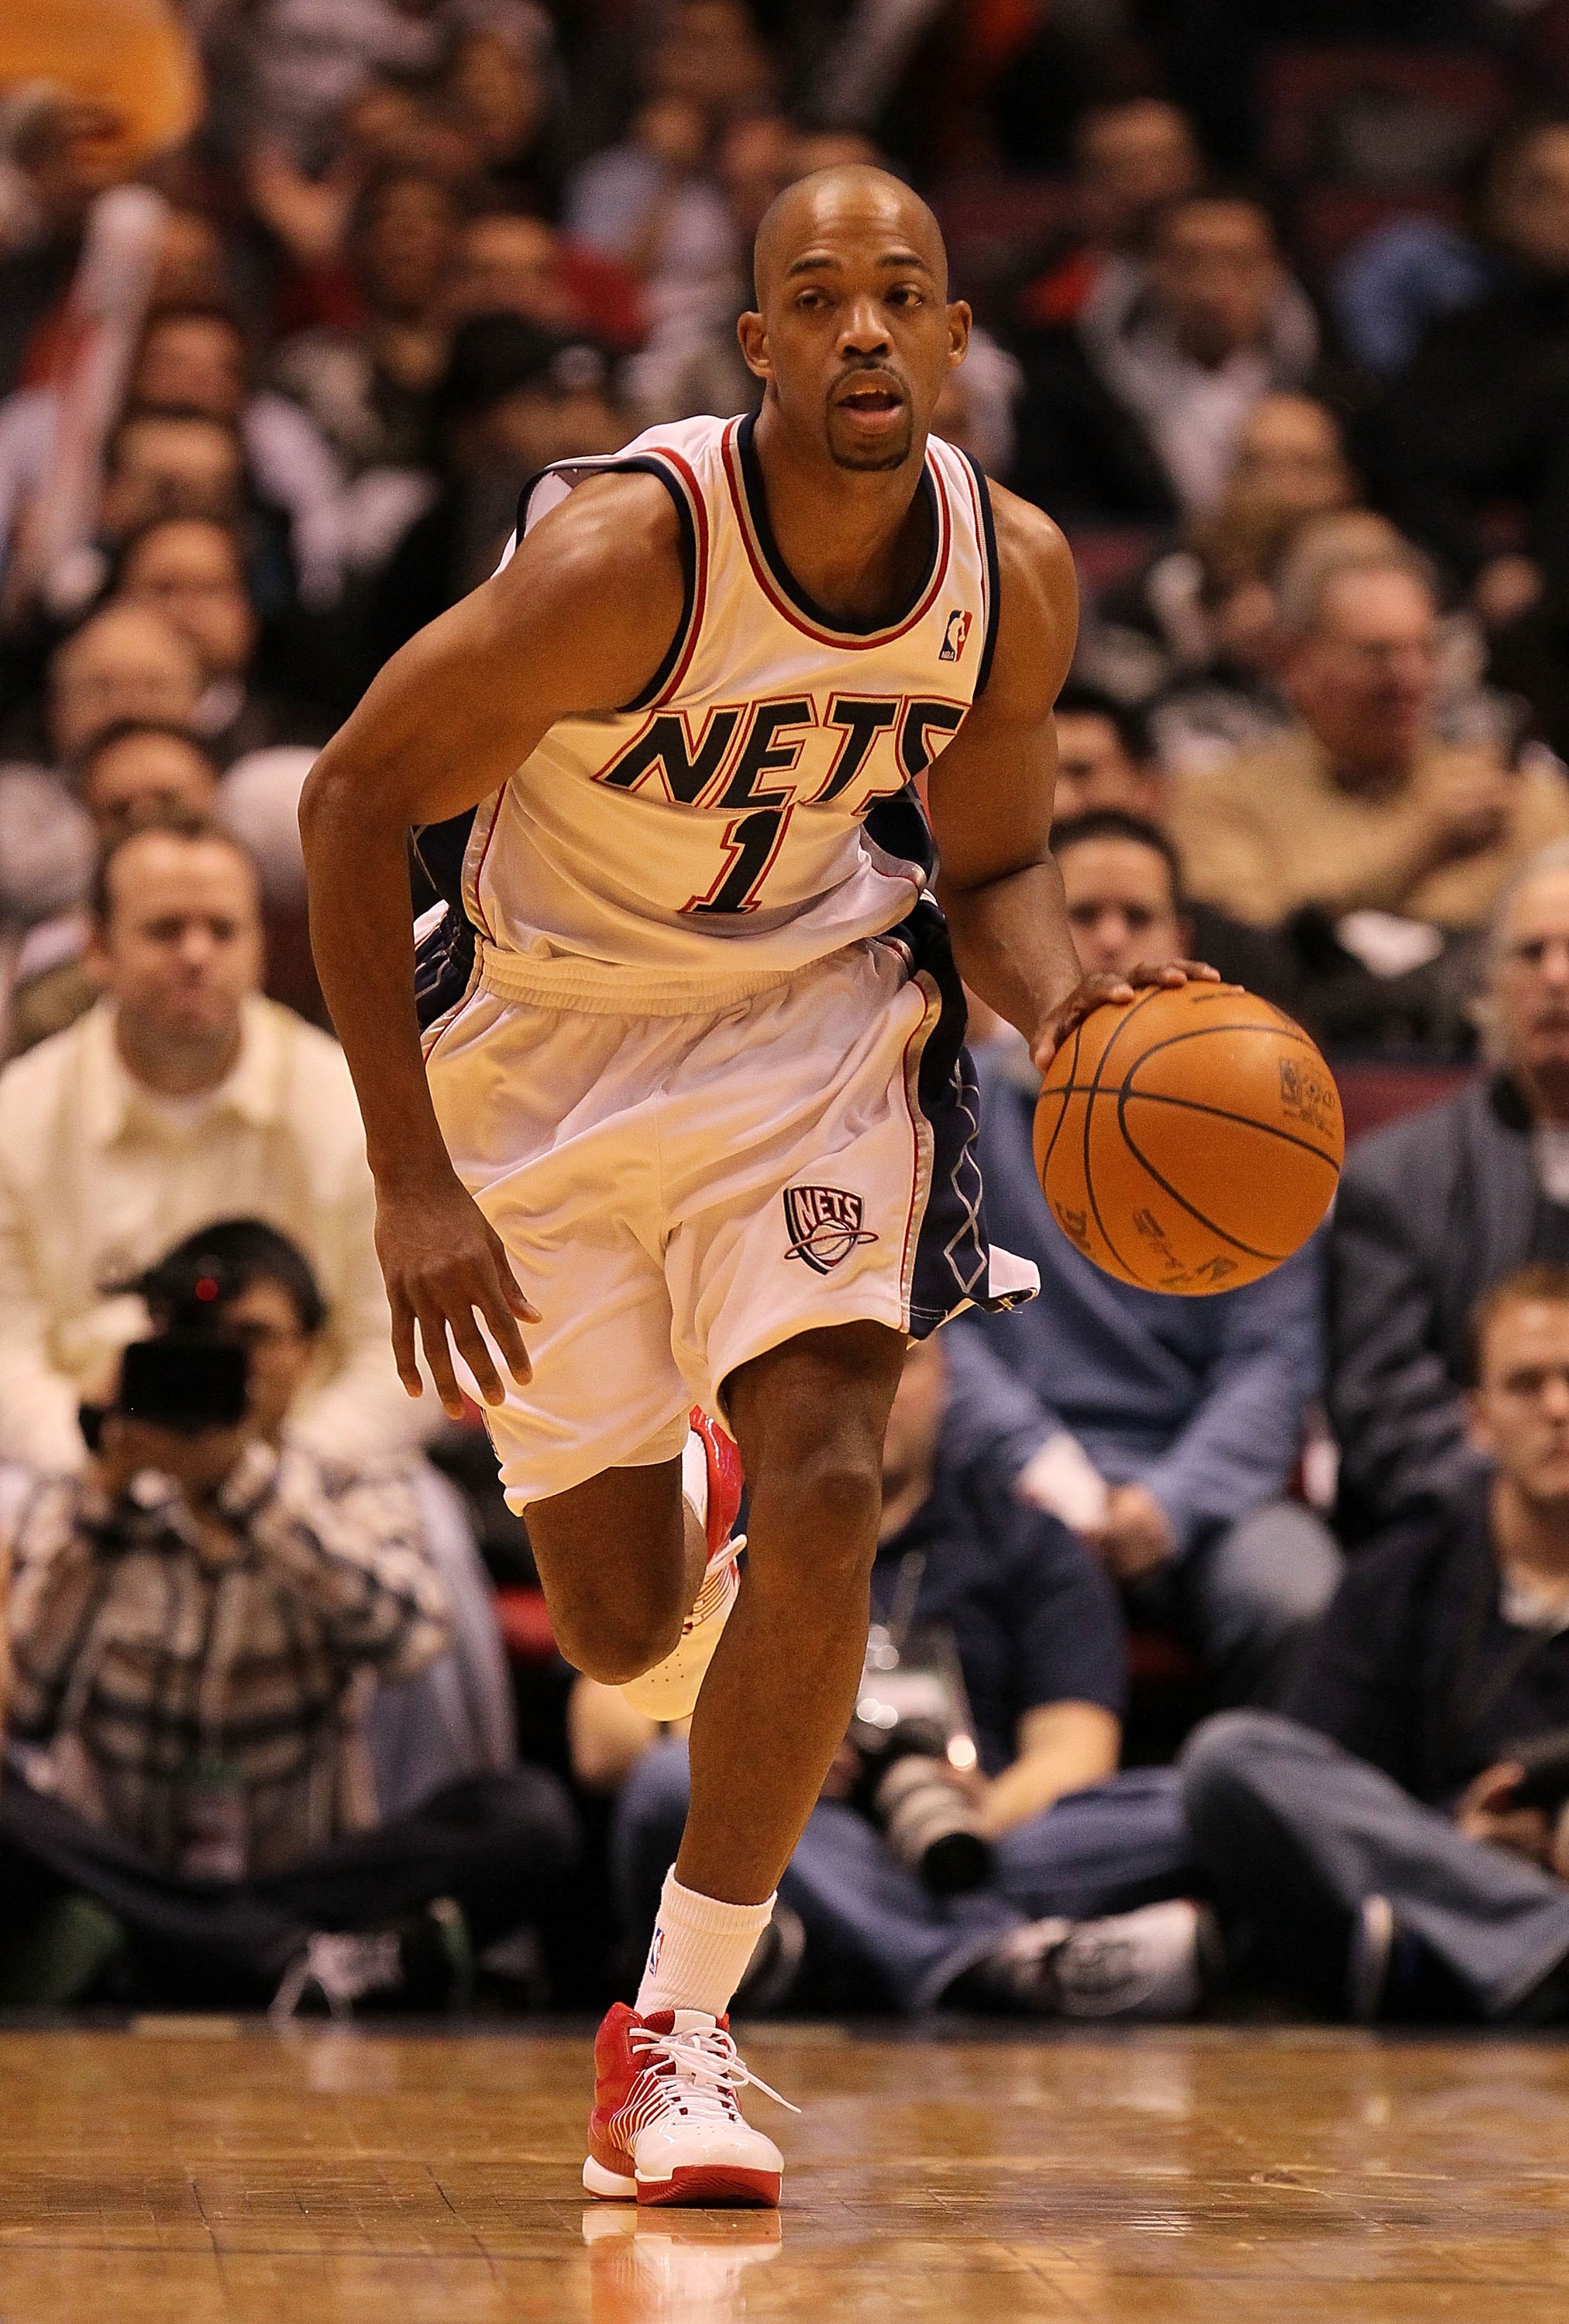 EAST RUTHERFORD, NJ - DECEMBER 16:  Rafer Alston #1 of the New Jersey Nets in action against The Utah Jazz during their game on December 16th, 2009 at The Izod Center in East Rutherford, New Jersey.  NOTE TO USER: User expressly acknowledges and agrees th